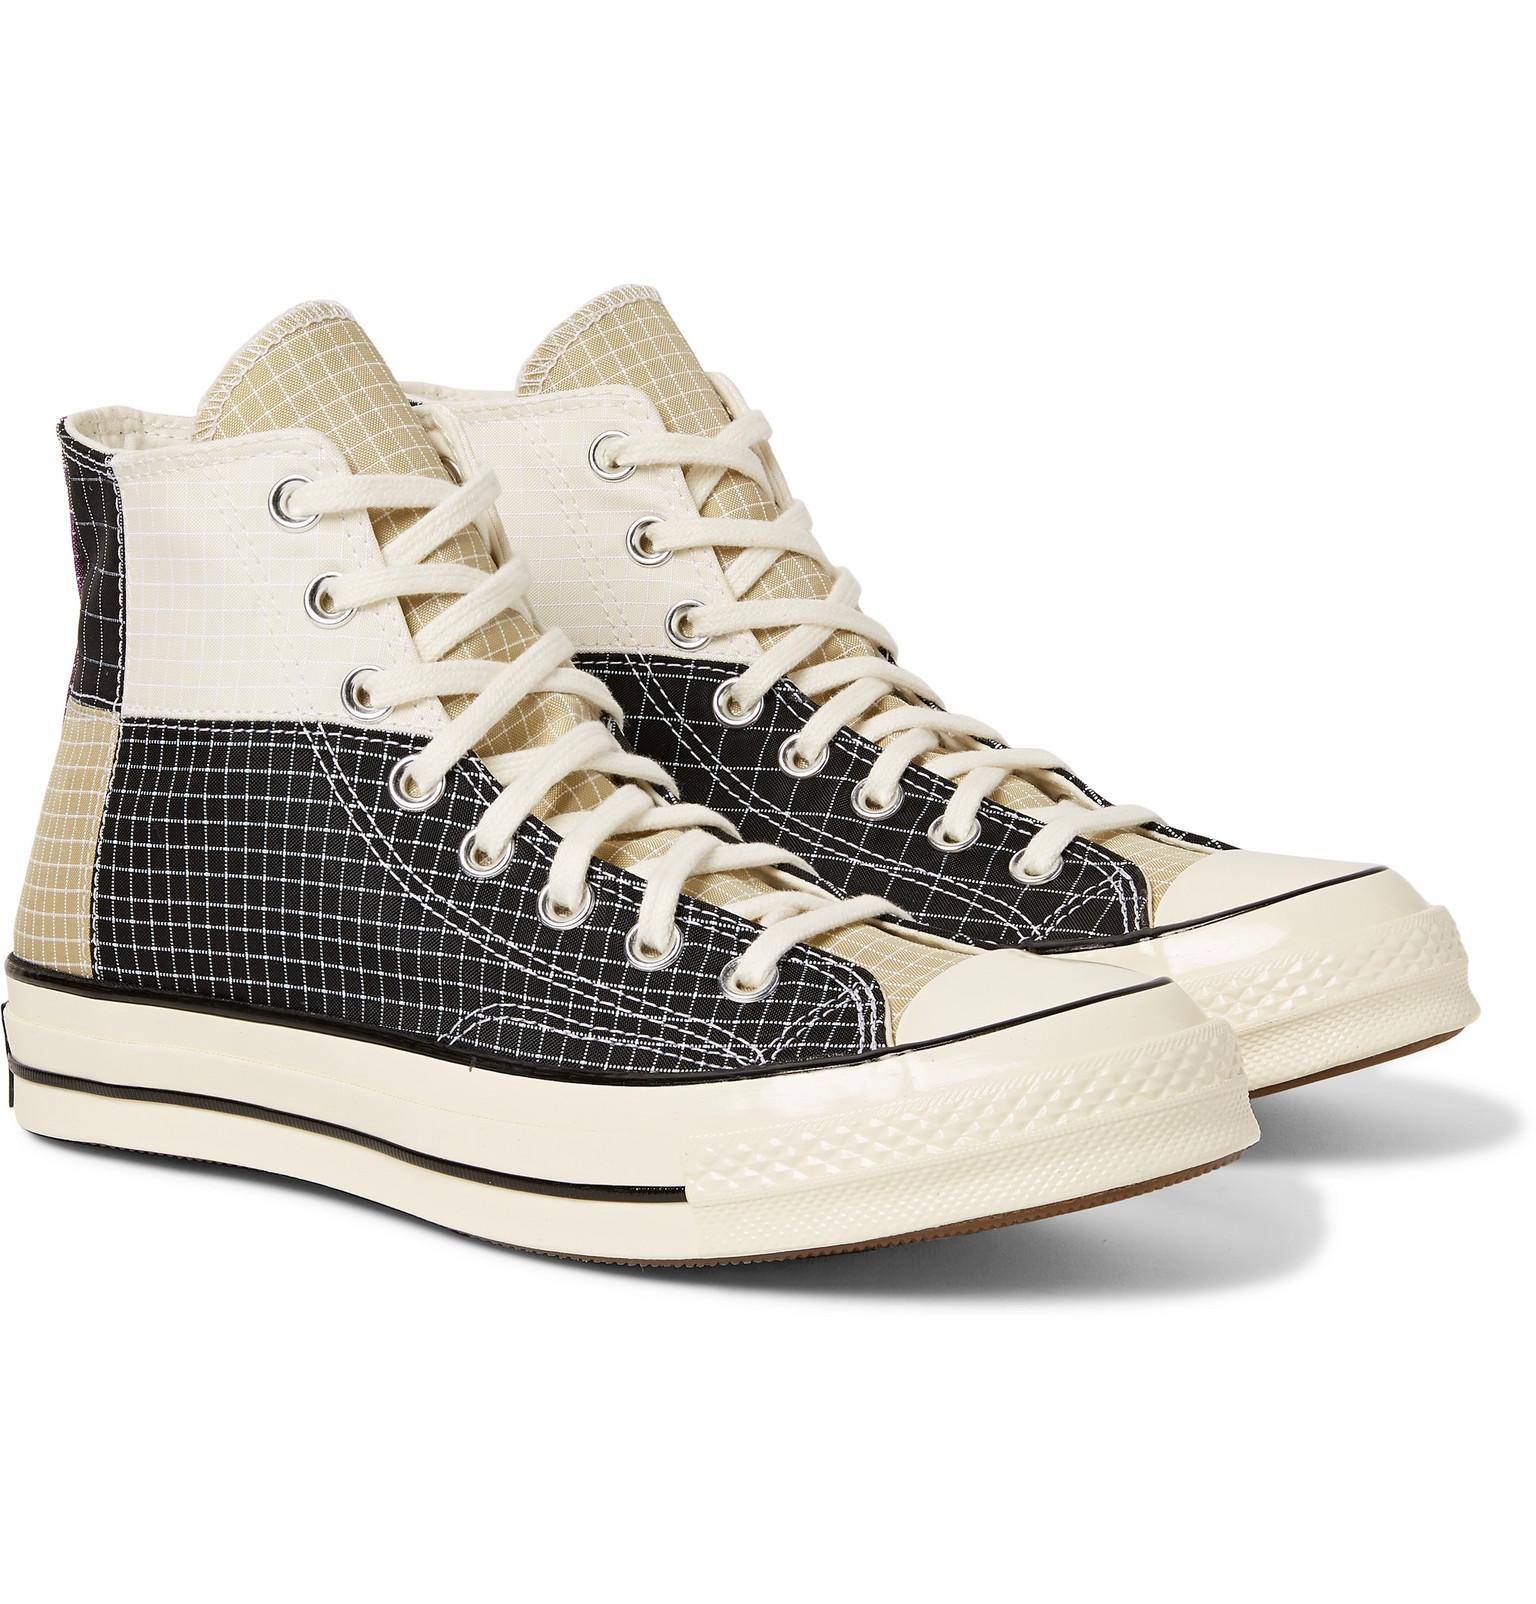 Converse Chuck 70 Patchwork Ripstop High-top Sneakers for Men - Lyst